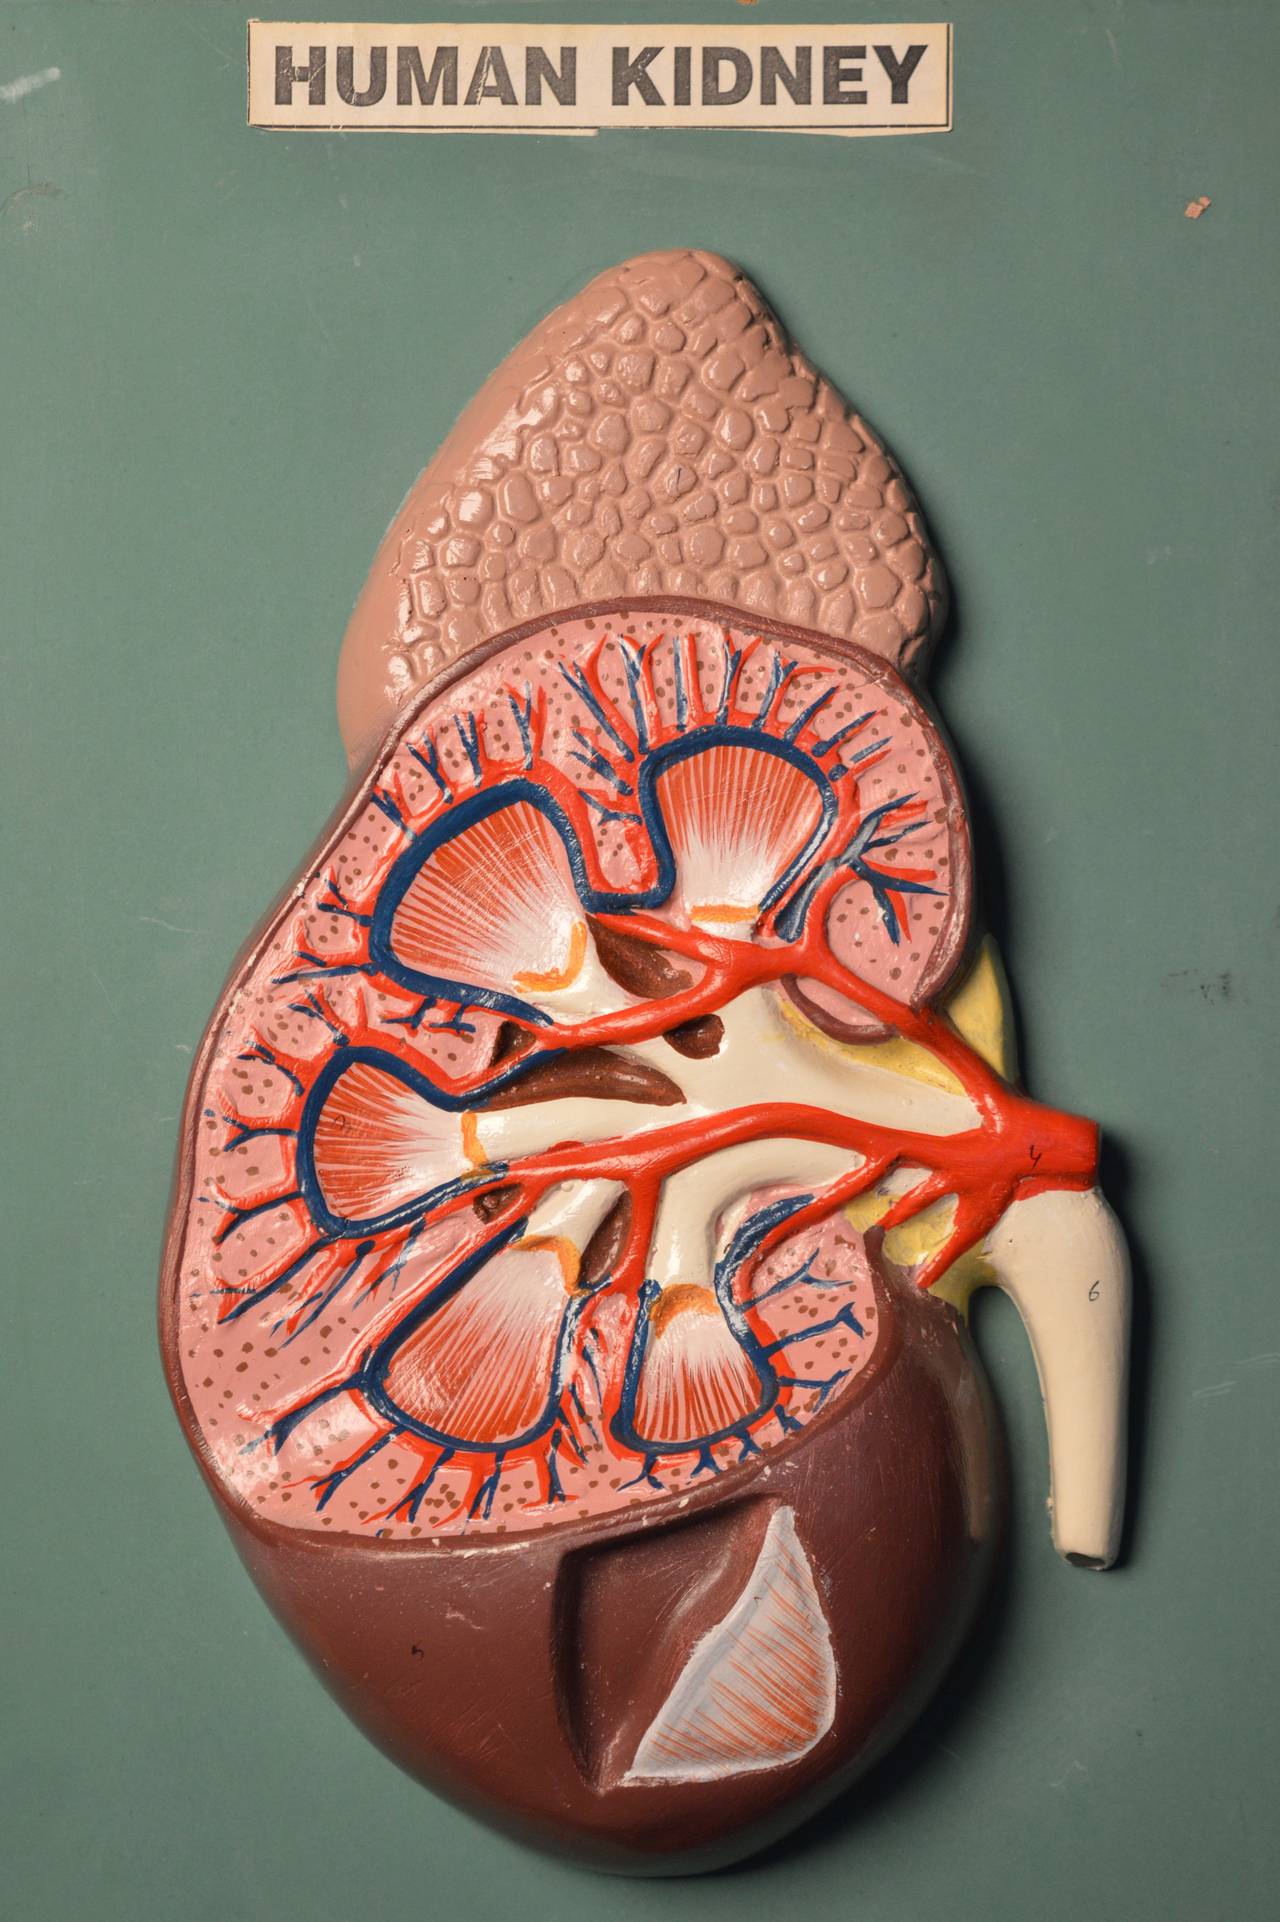 A circa 1970 British wall plaque diagraming the human kidney. The kidney is hand painted and numbered to correspond to the key card on the lower right.
The text is printed on paper.